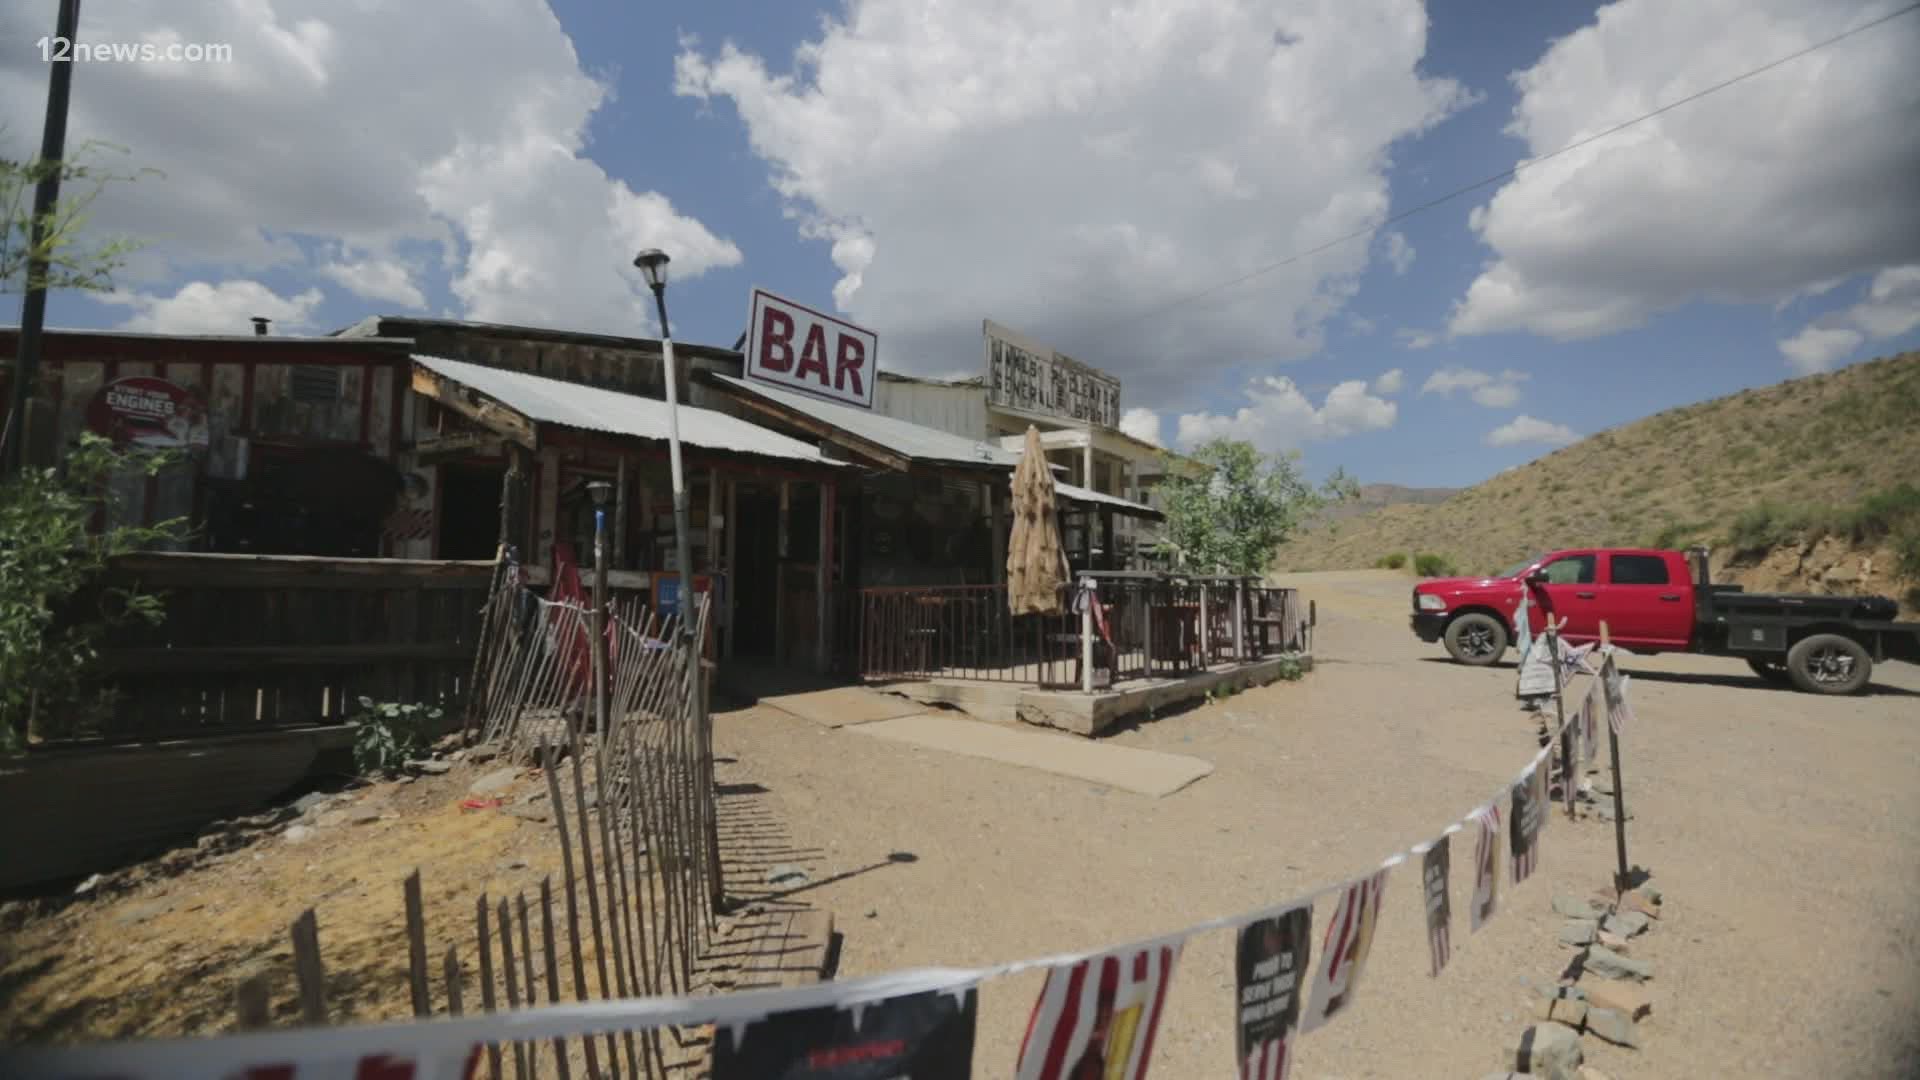 A ghost town 90 minutes north of the Valley is for sale if you have enough money. The Town of Cleator has a bar and yacht club and it can be yours for $1.25 million.